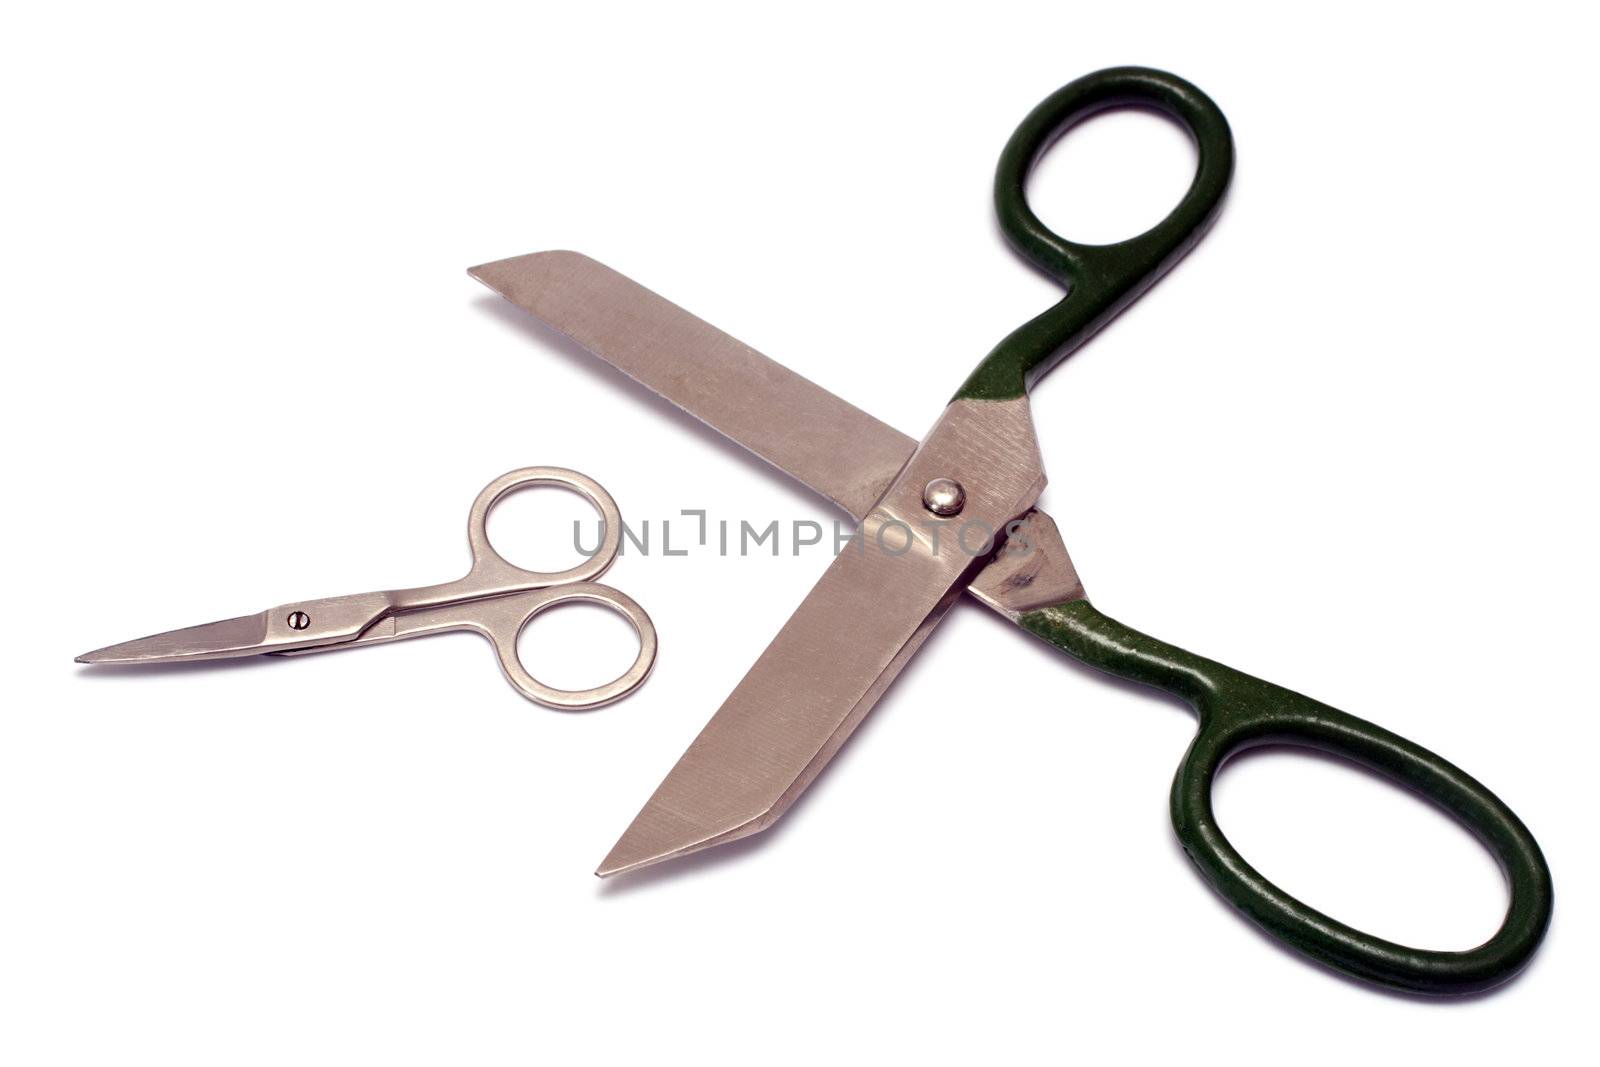 big and small shears close-up isolated on white